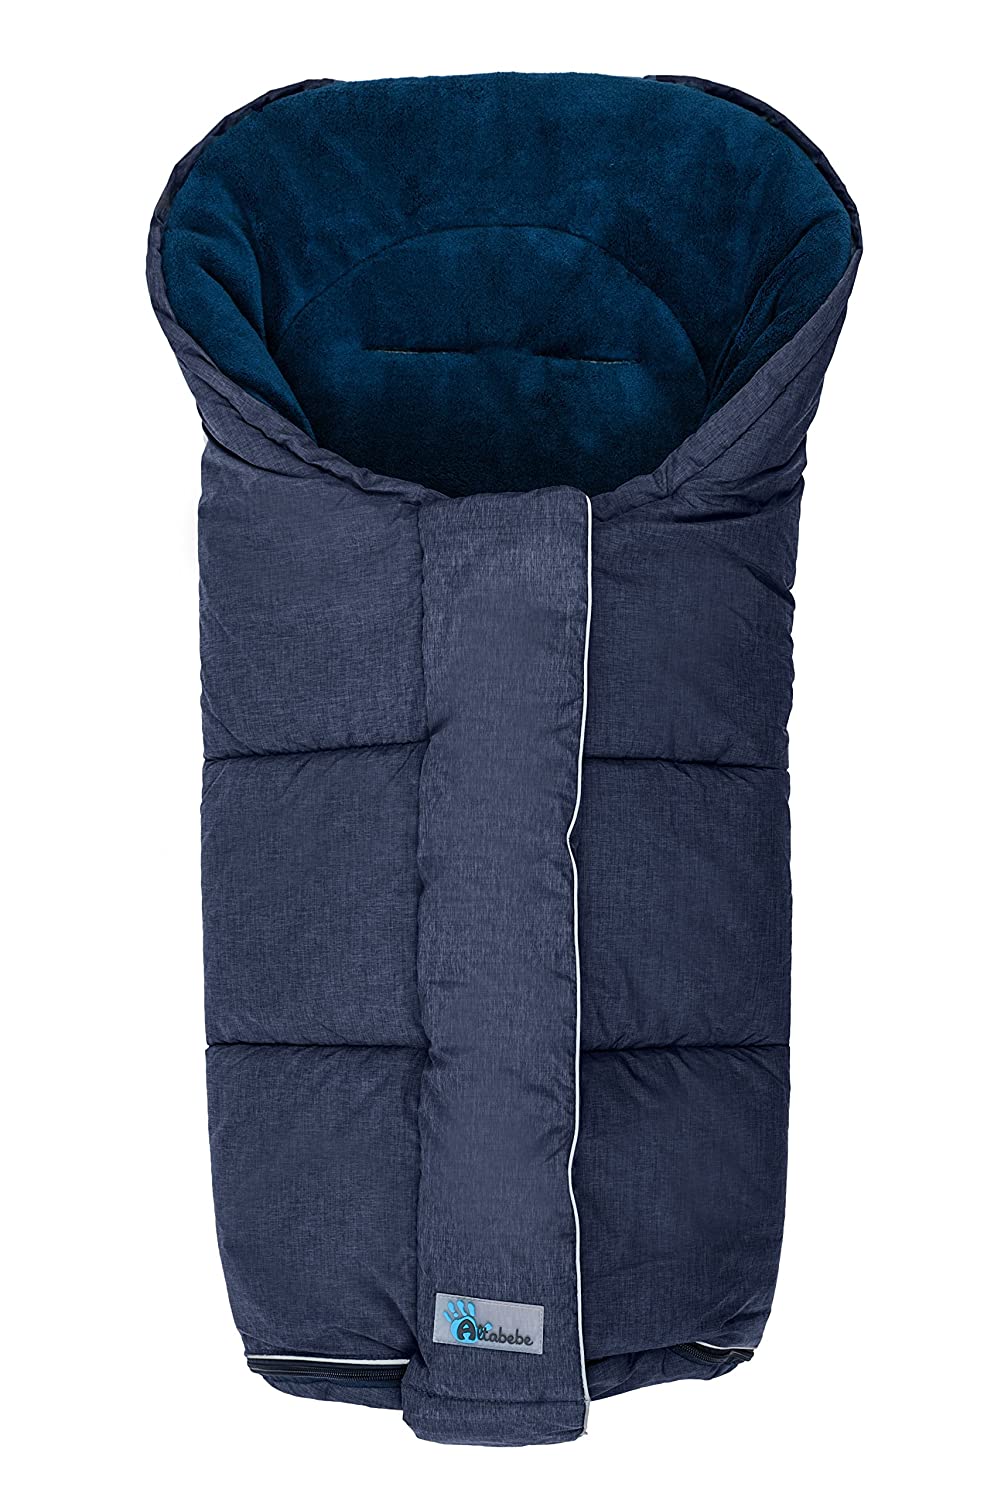 Altabebe AL2277P-49 Alpin Collection Winter Foot Muff for Pushchairs and Buggies (9-36 Months) Blue